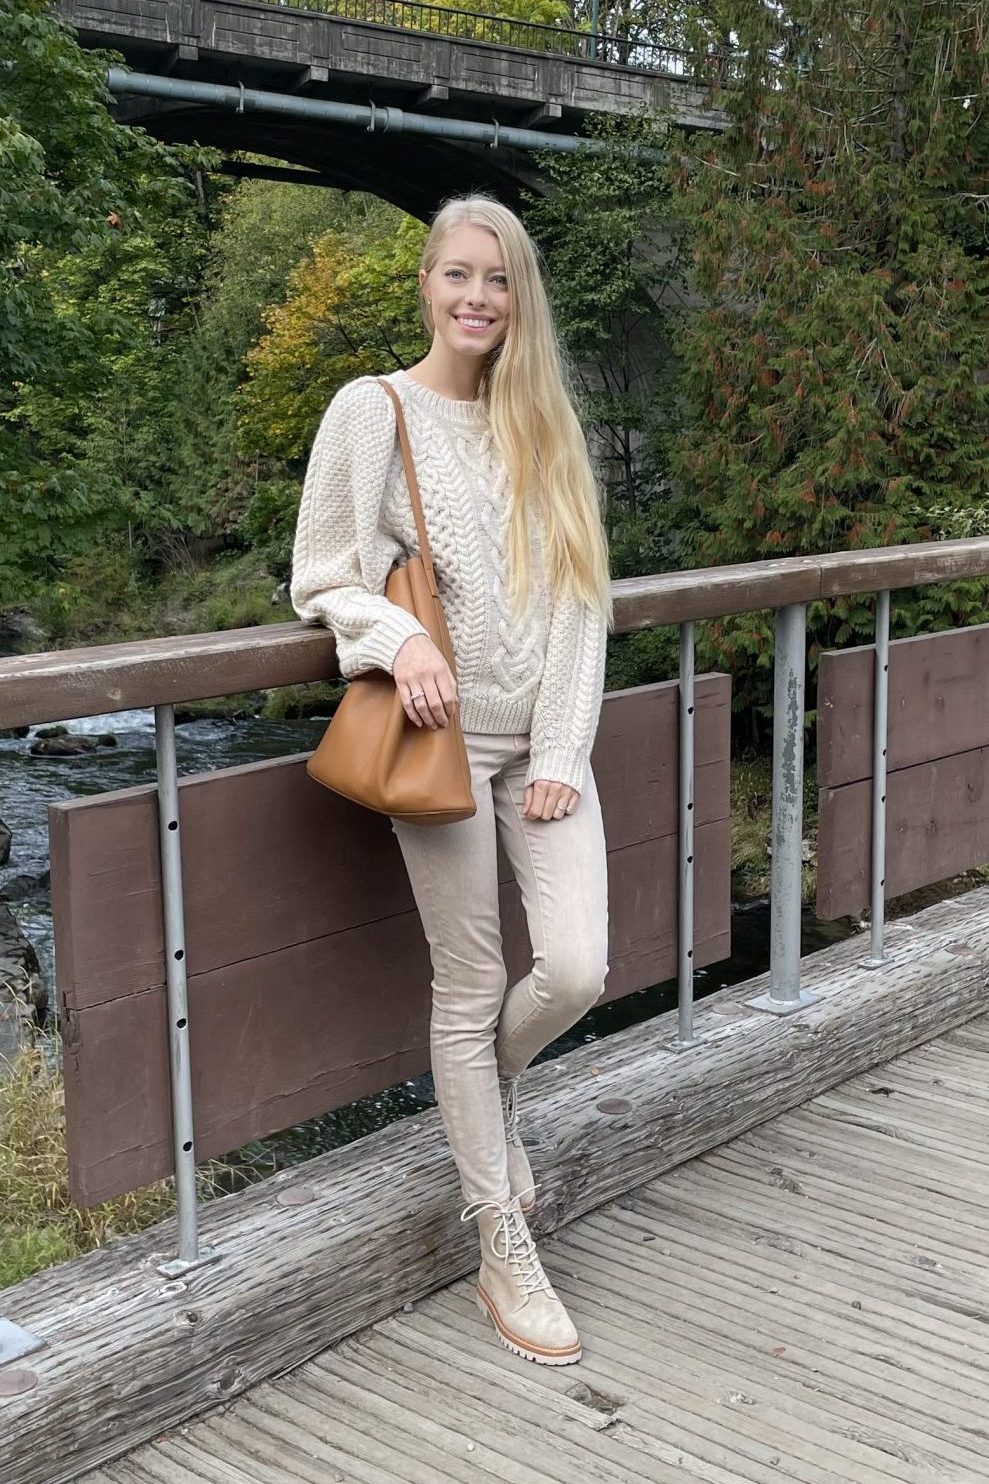 Chanel 19 Styled with a Neutral Outfit - Alyssa Smirnov